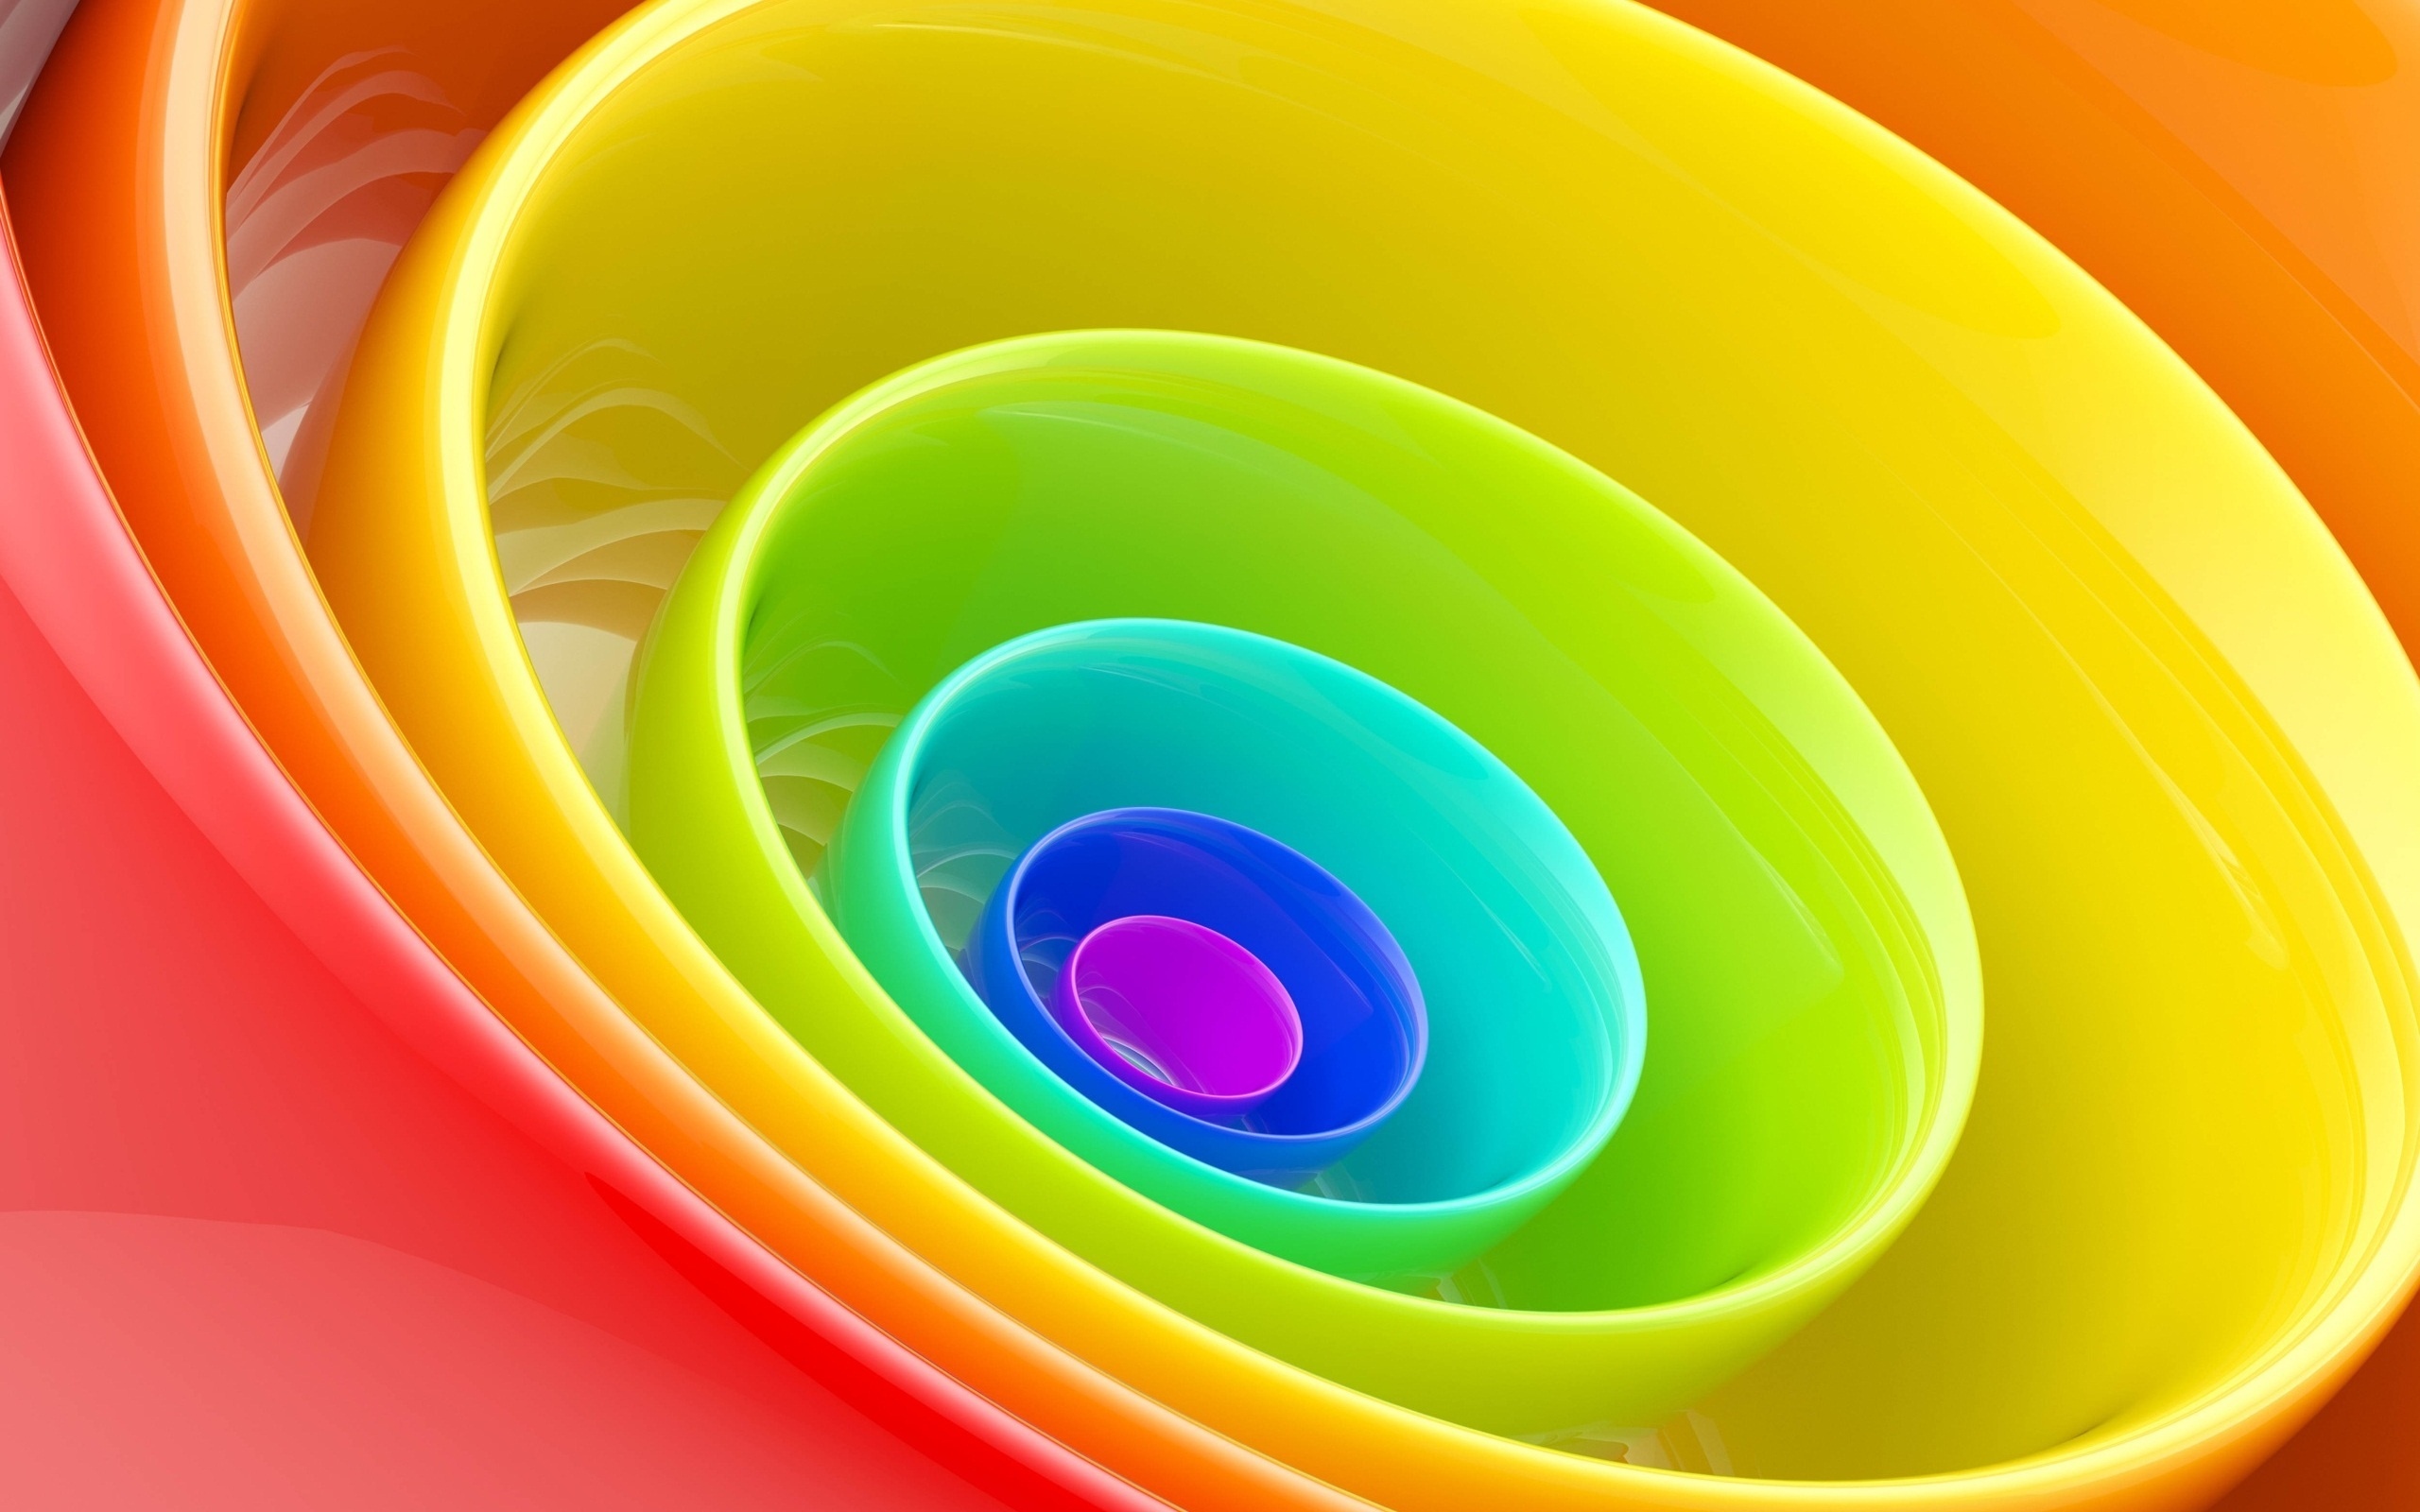 Abstract colors wallpaper, Colorful and vibrant, Artistic expressions, A burst of color, 2560x1600 HD Desktop